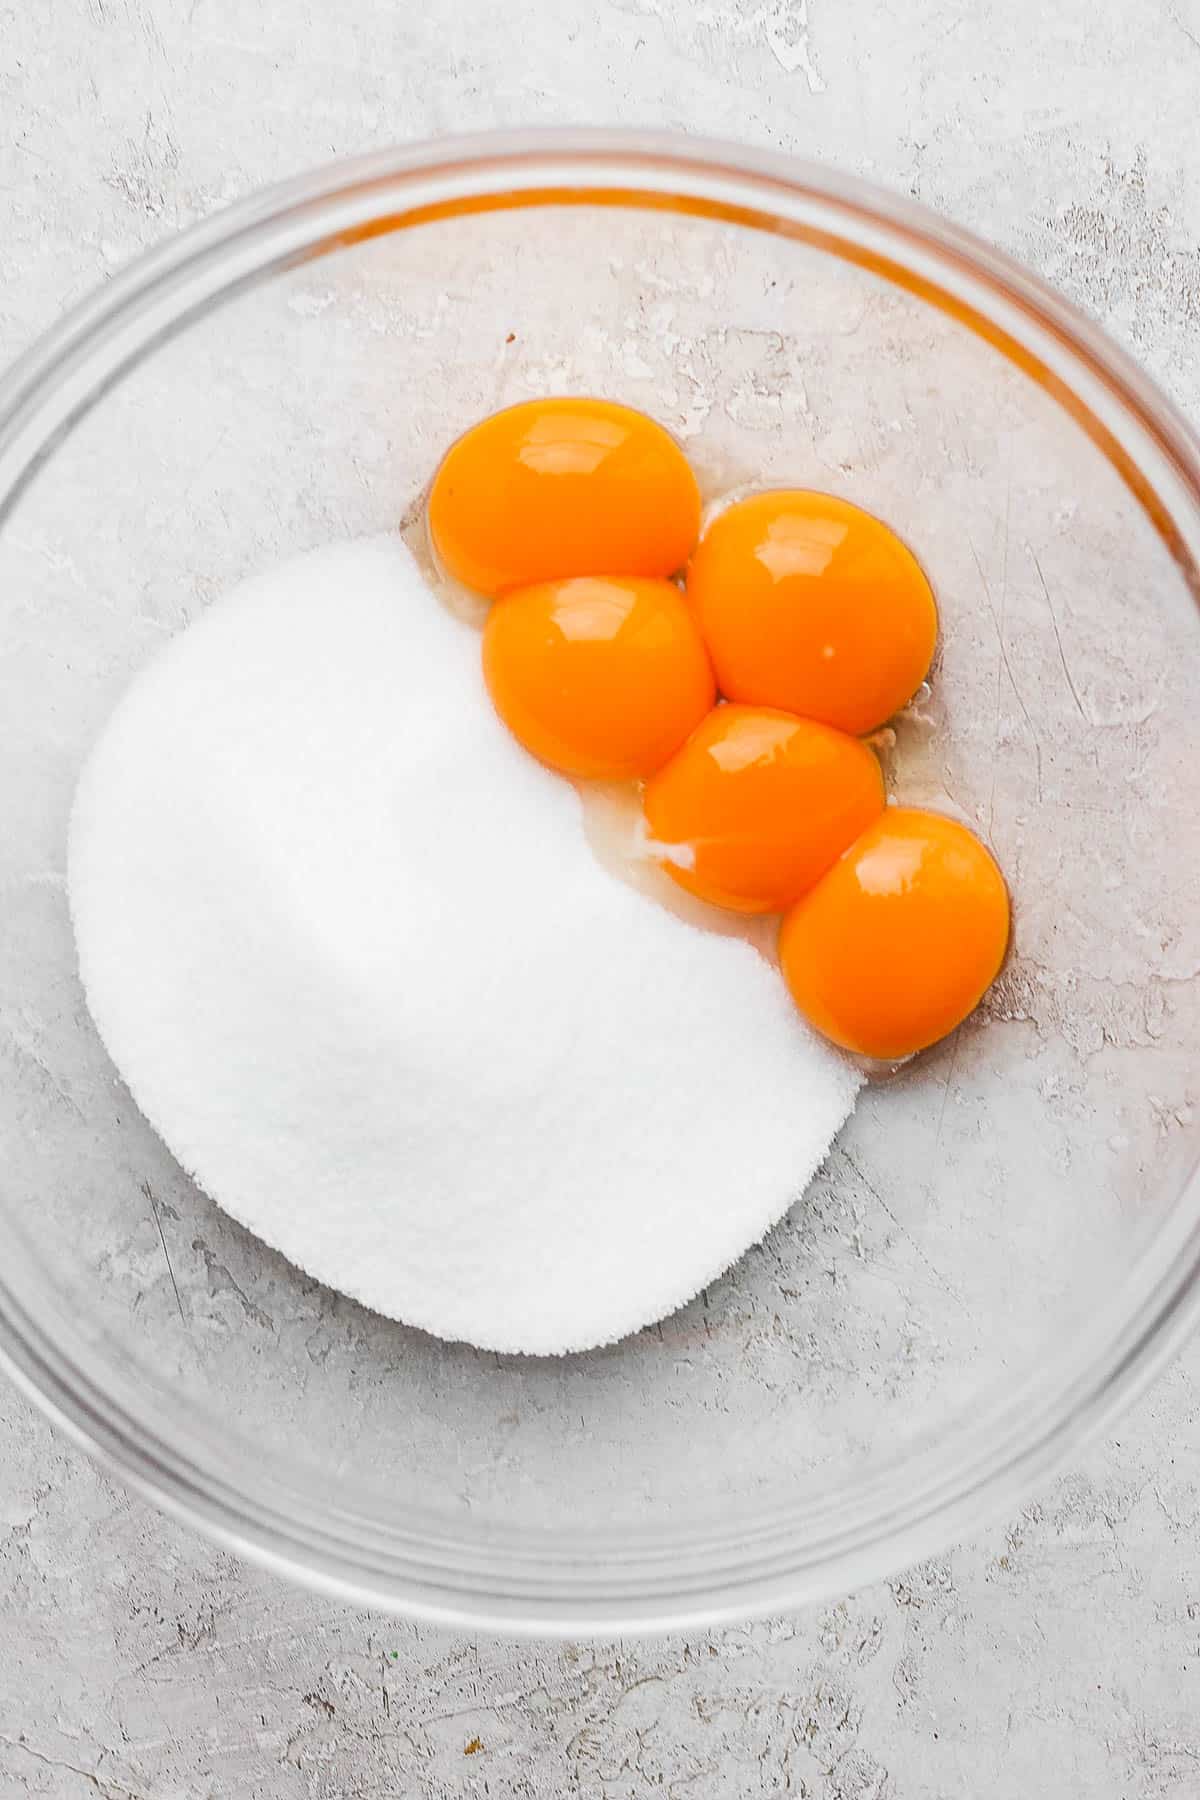 Egg yolks and sugar in a bowl.